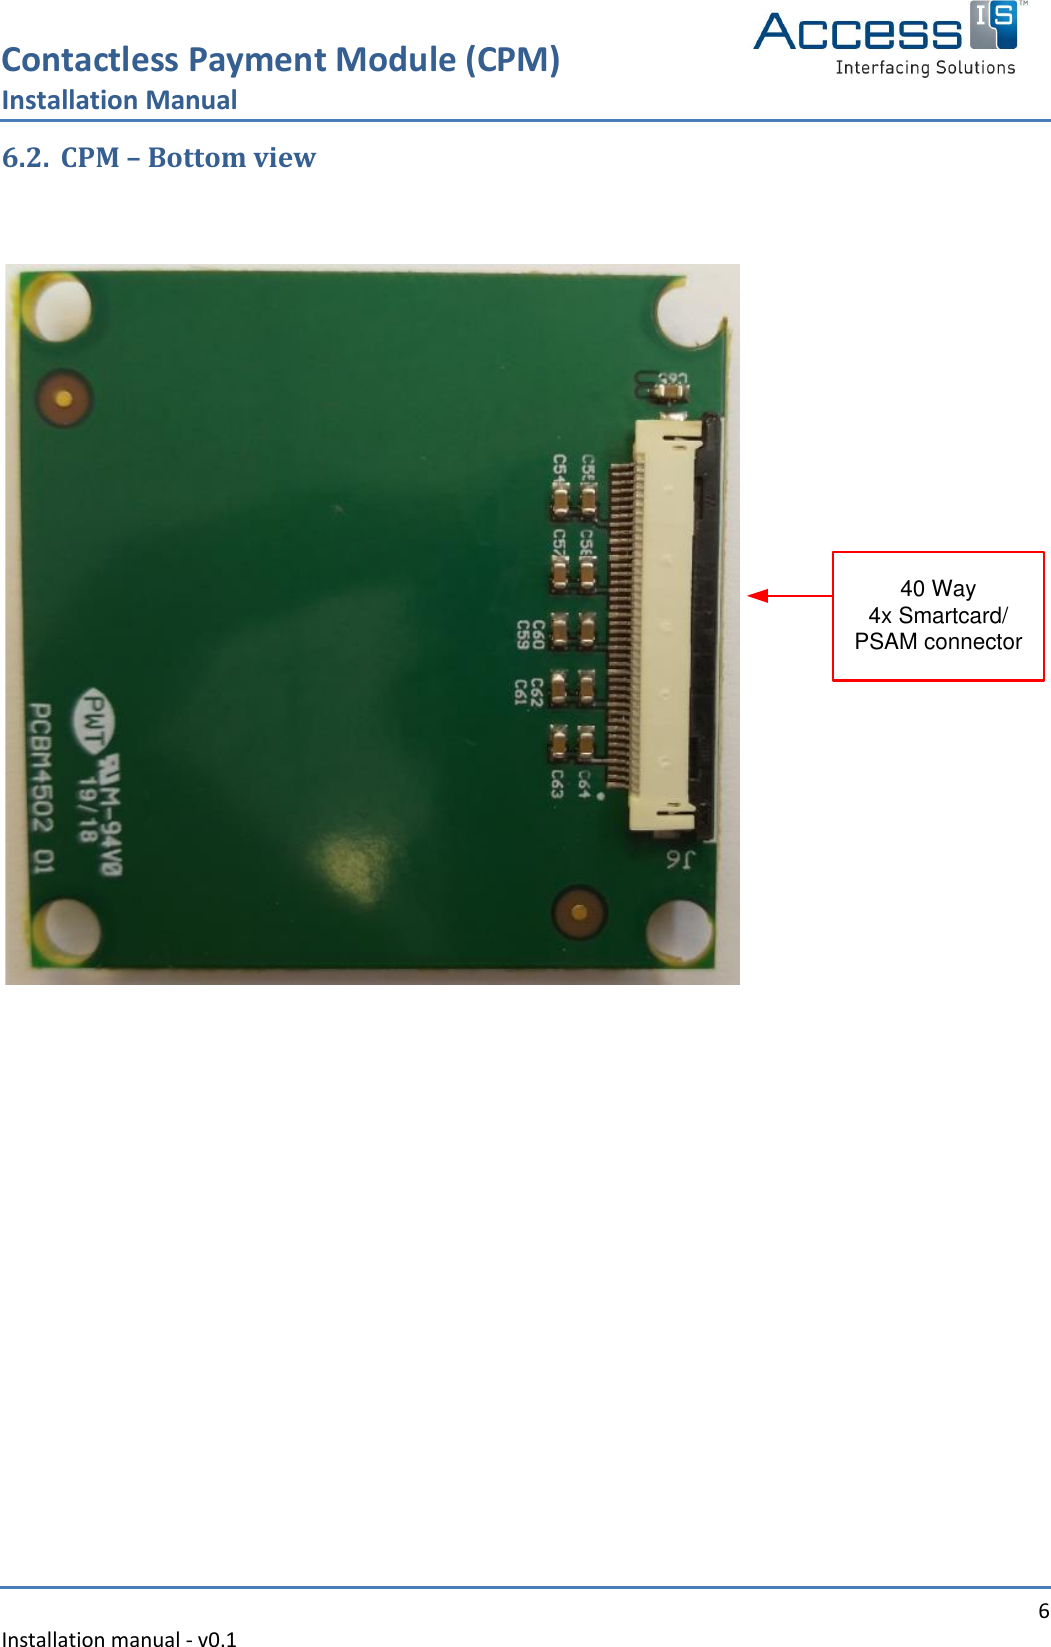 Contactless Payment Module (CPM) Installation Manual   6 Installation manual - v0.1  6.2. CPM – Bottom view    40 Way4x Smartcard/PSAM connector 